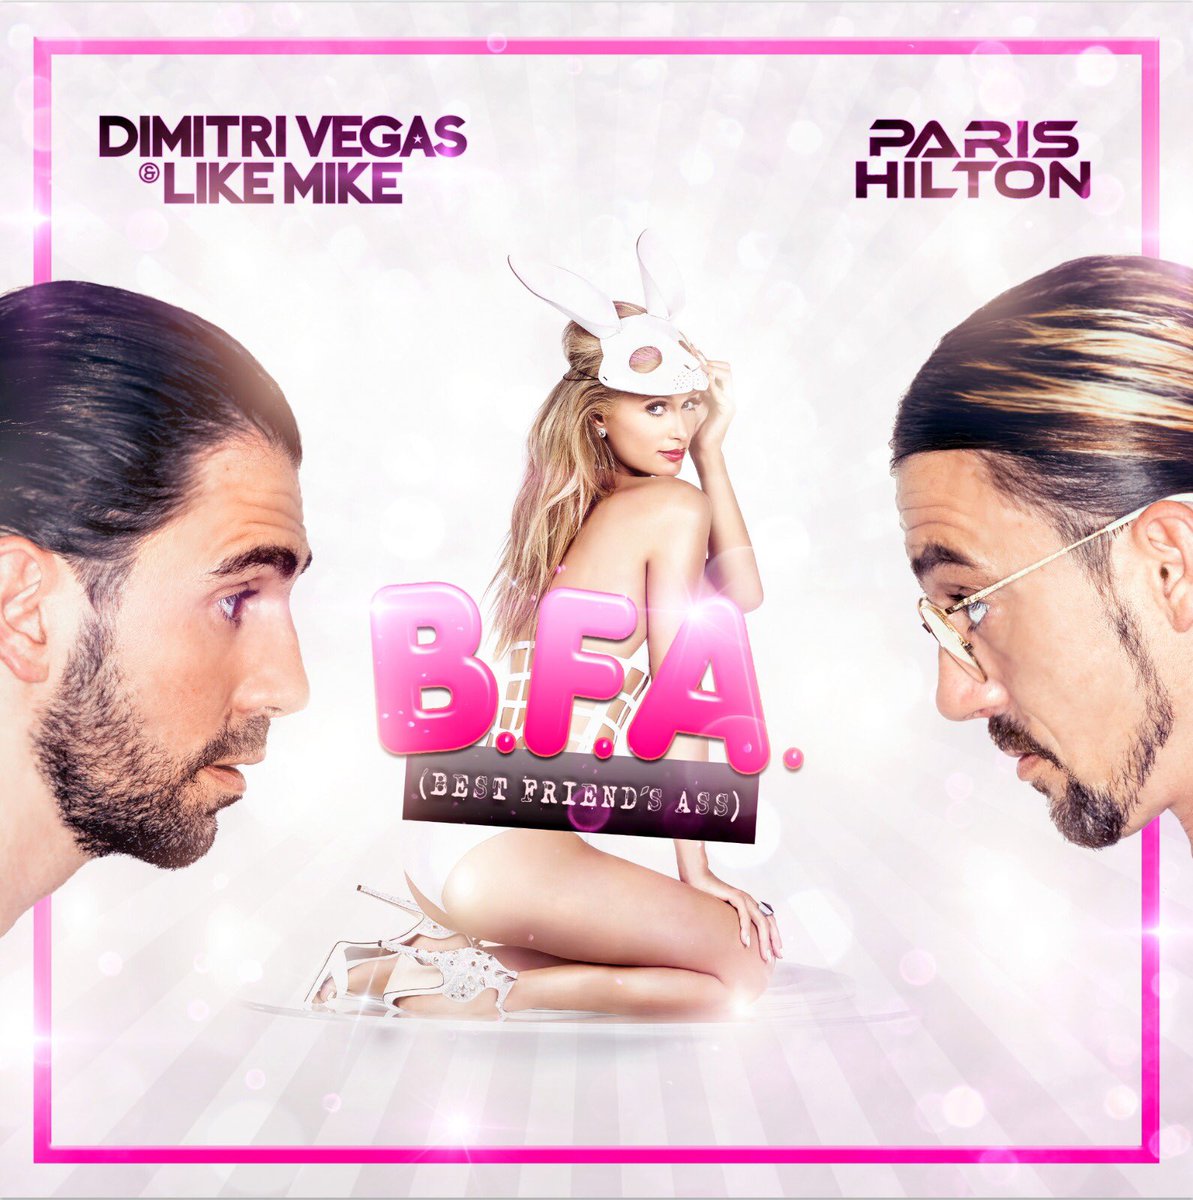 Best FRIENDS Ass ???????????? Pre-save my new track with @DimitriVegas & @RealLikeMike now ( Link in Bio) https://t.co/Lo6GEQ591t